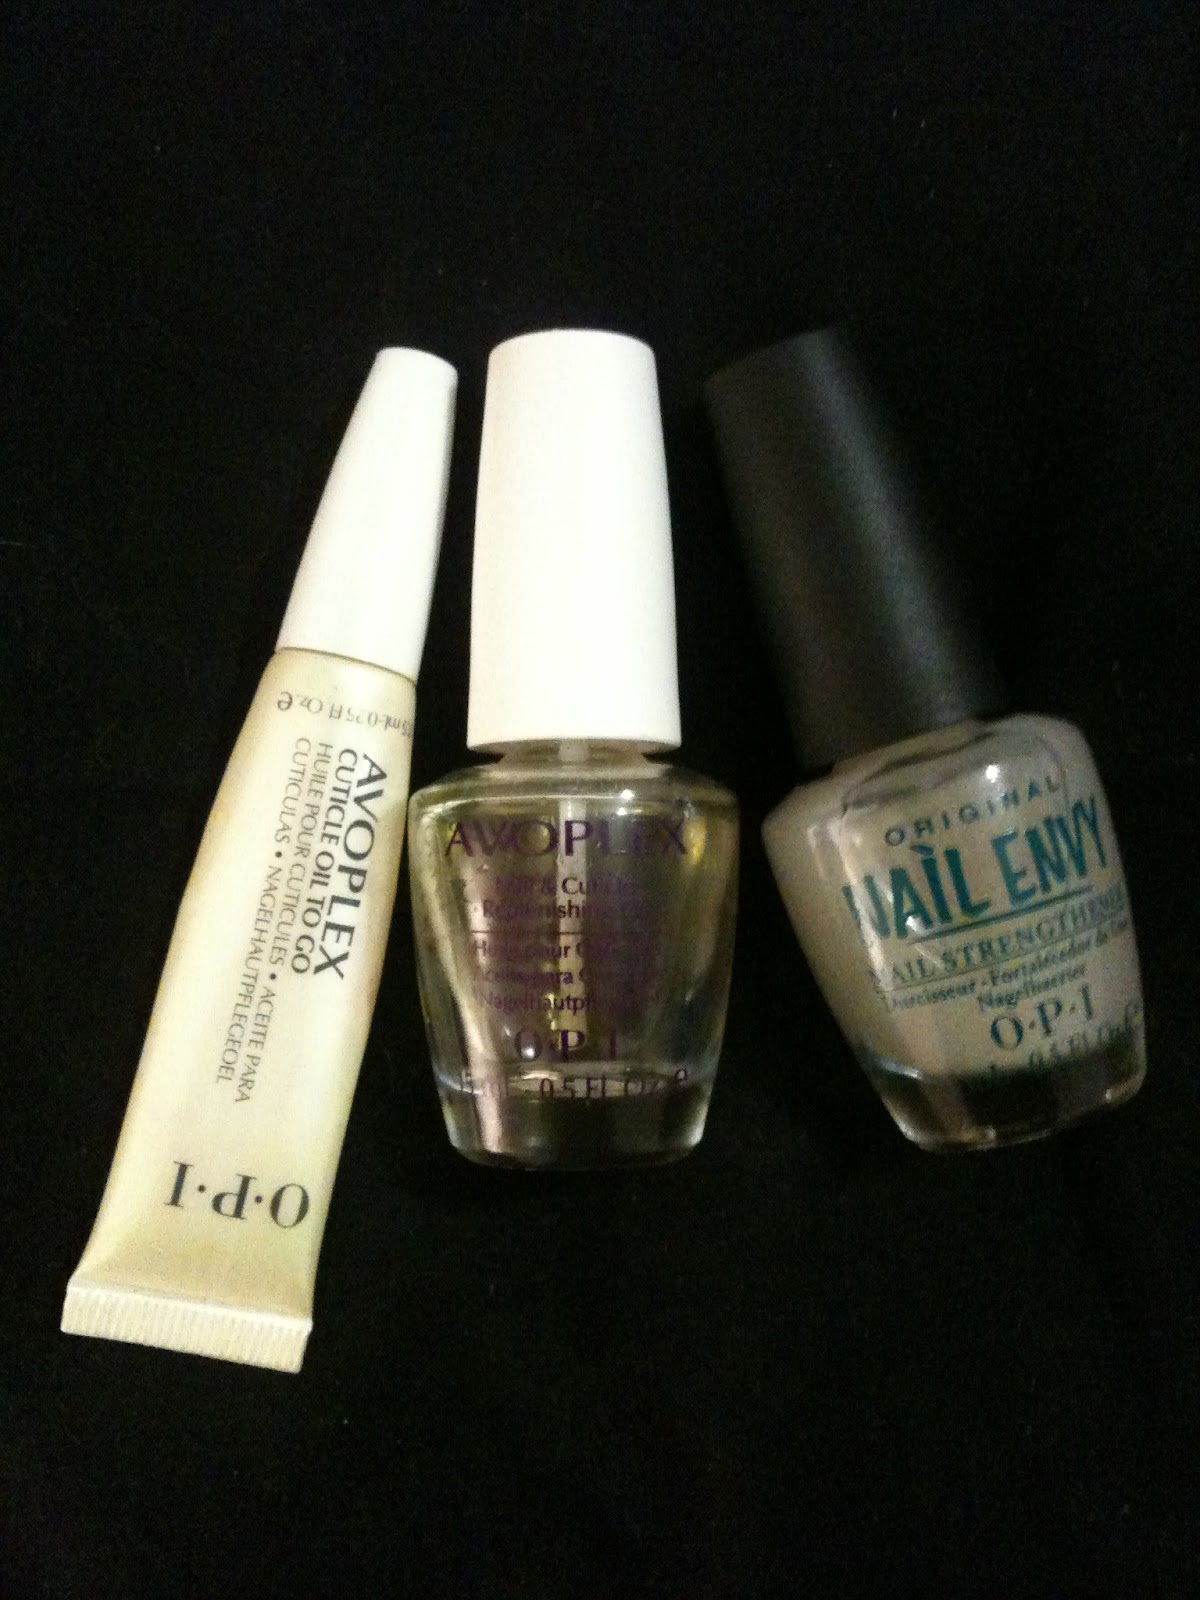 I was recommended to use OPI nail envy and avoplex oil together to